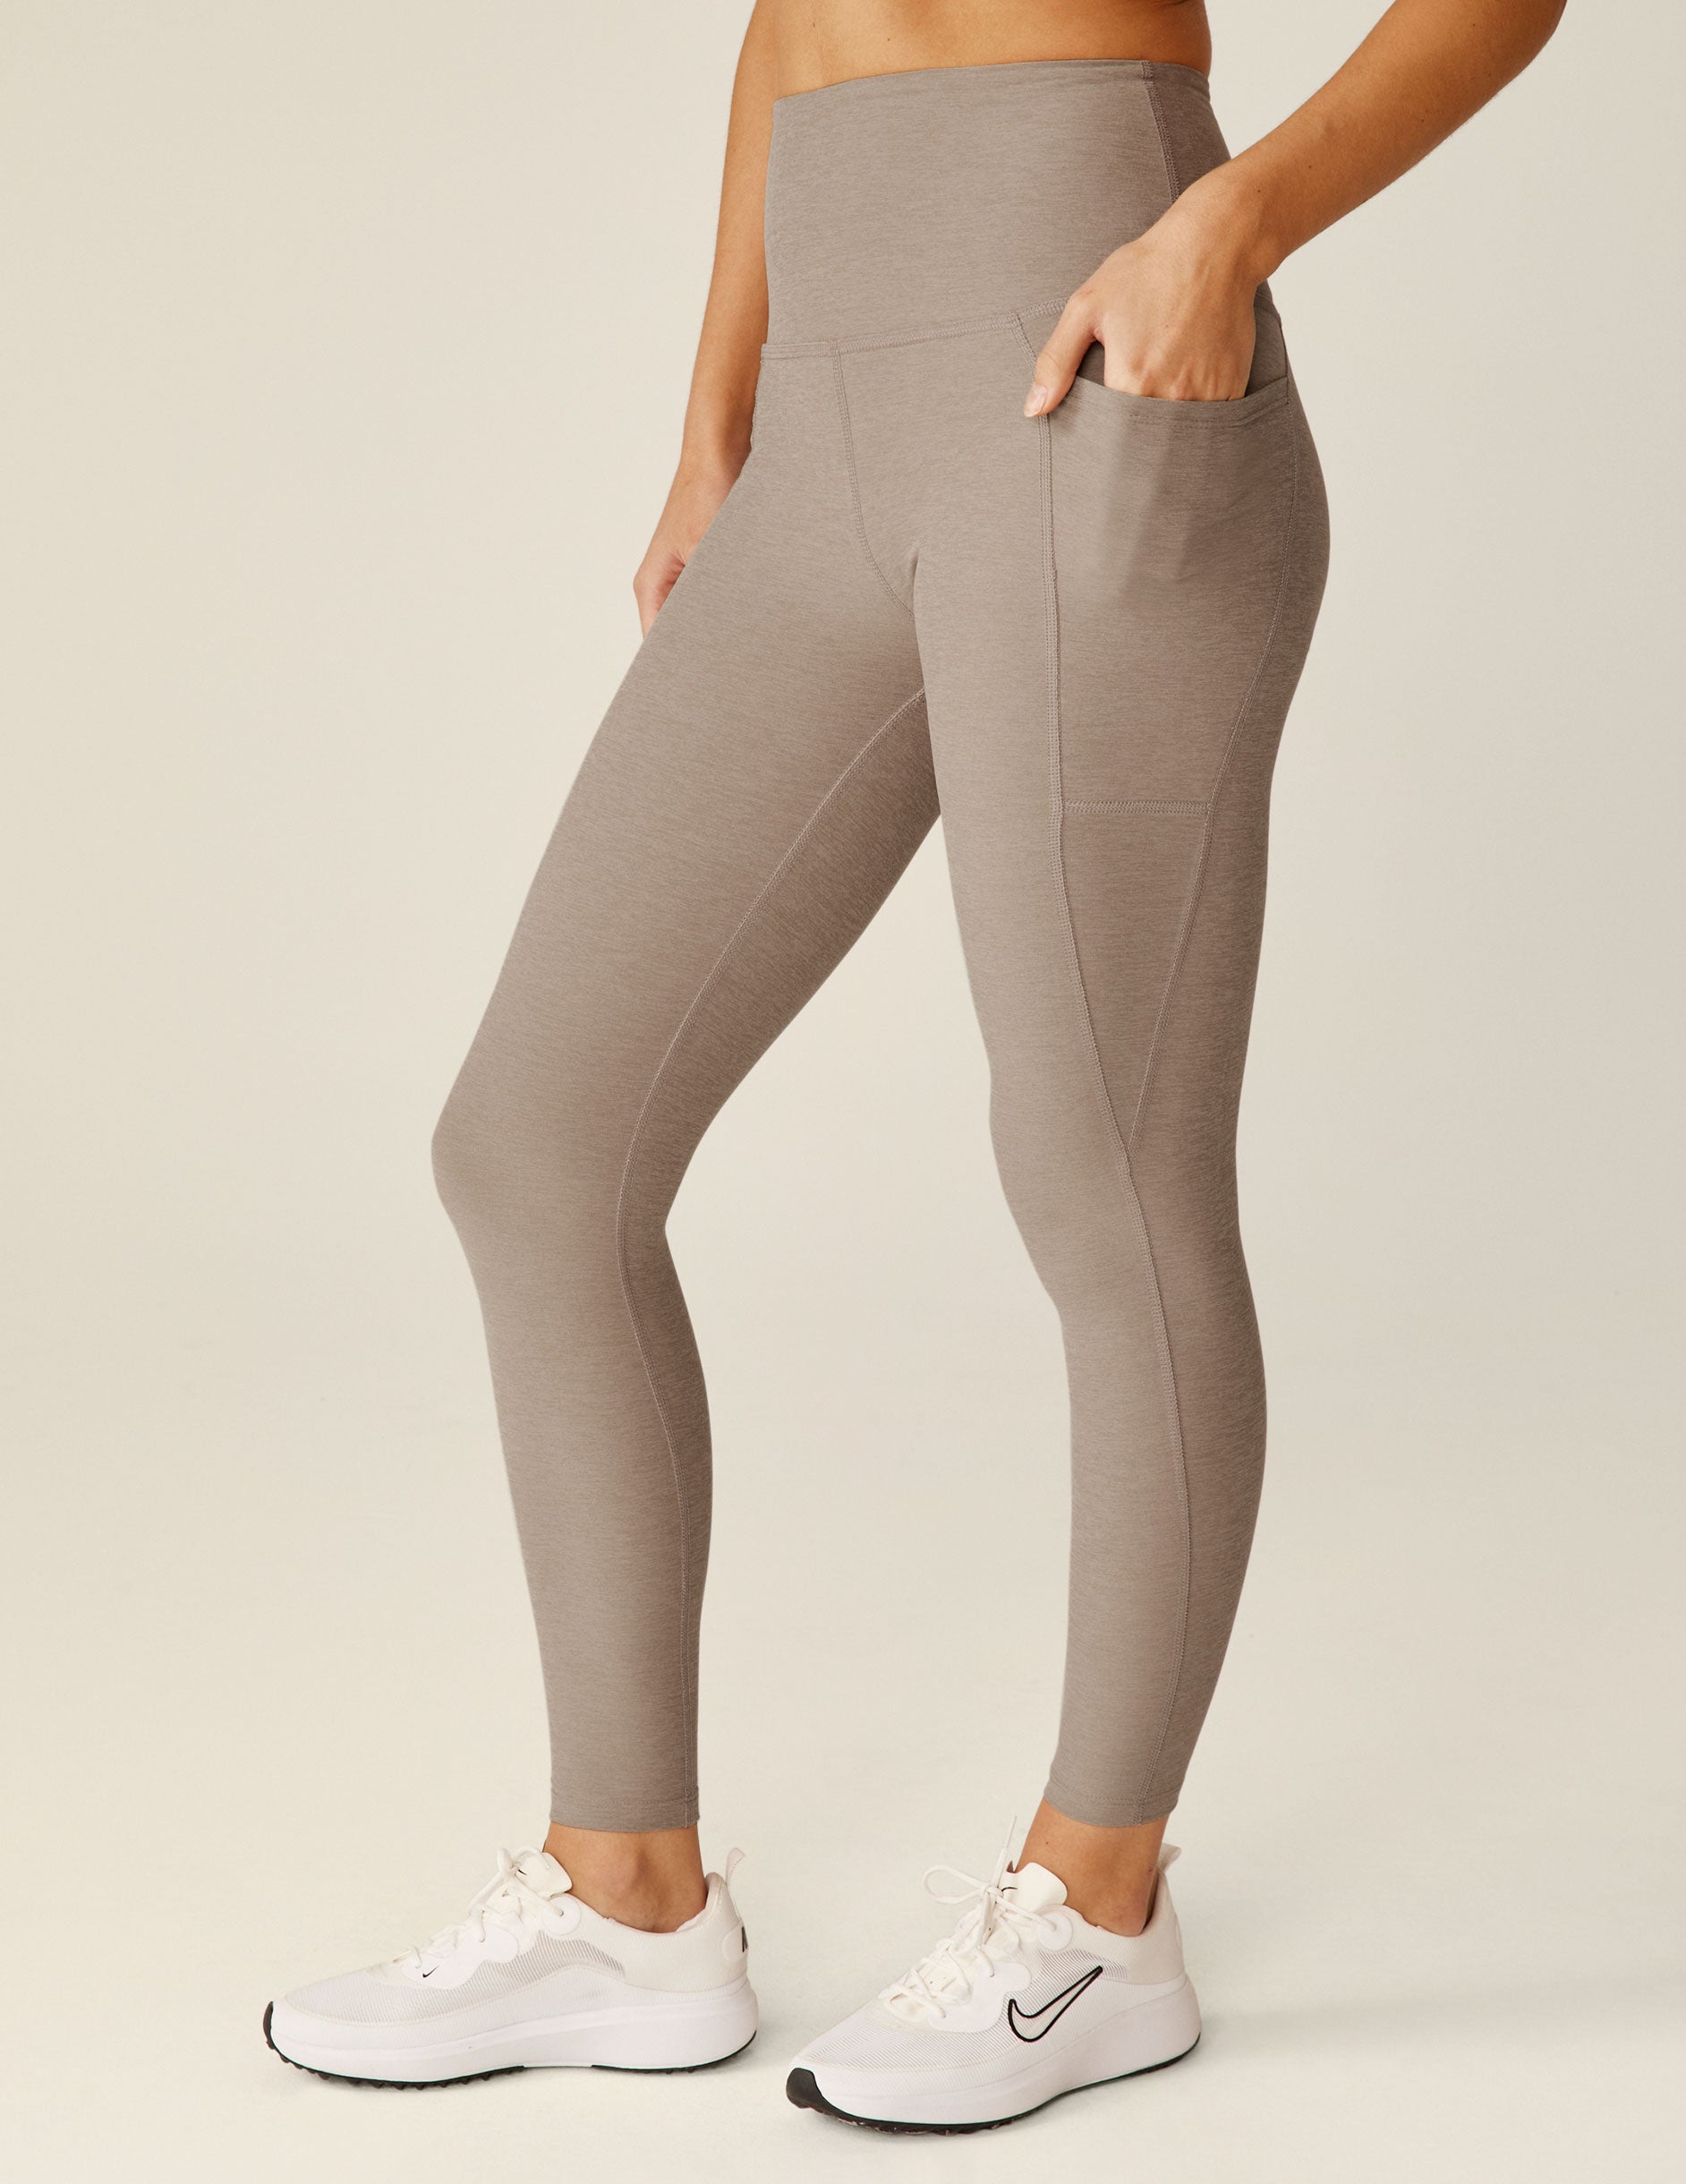 UUE Yoga Leggings with Pockets for Women, High Palestine